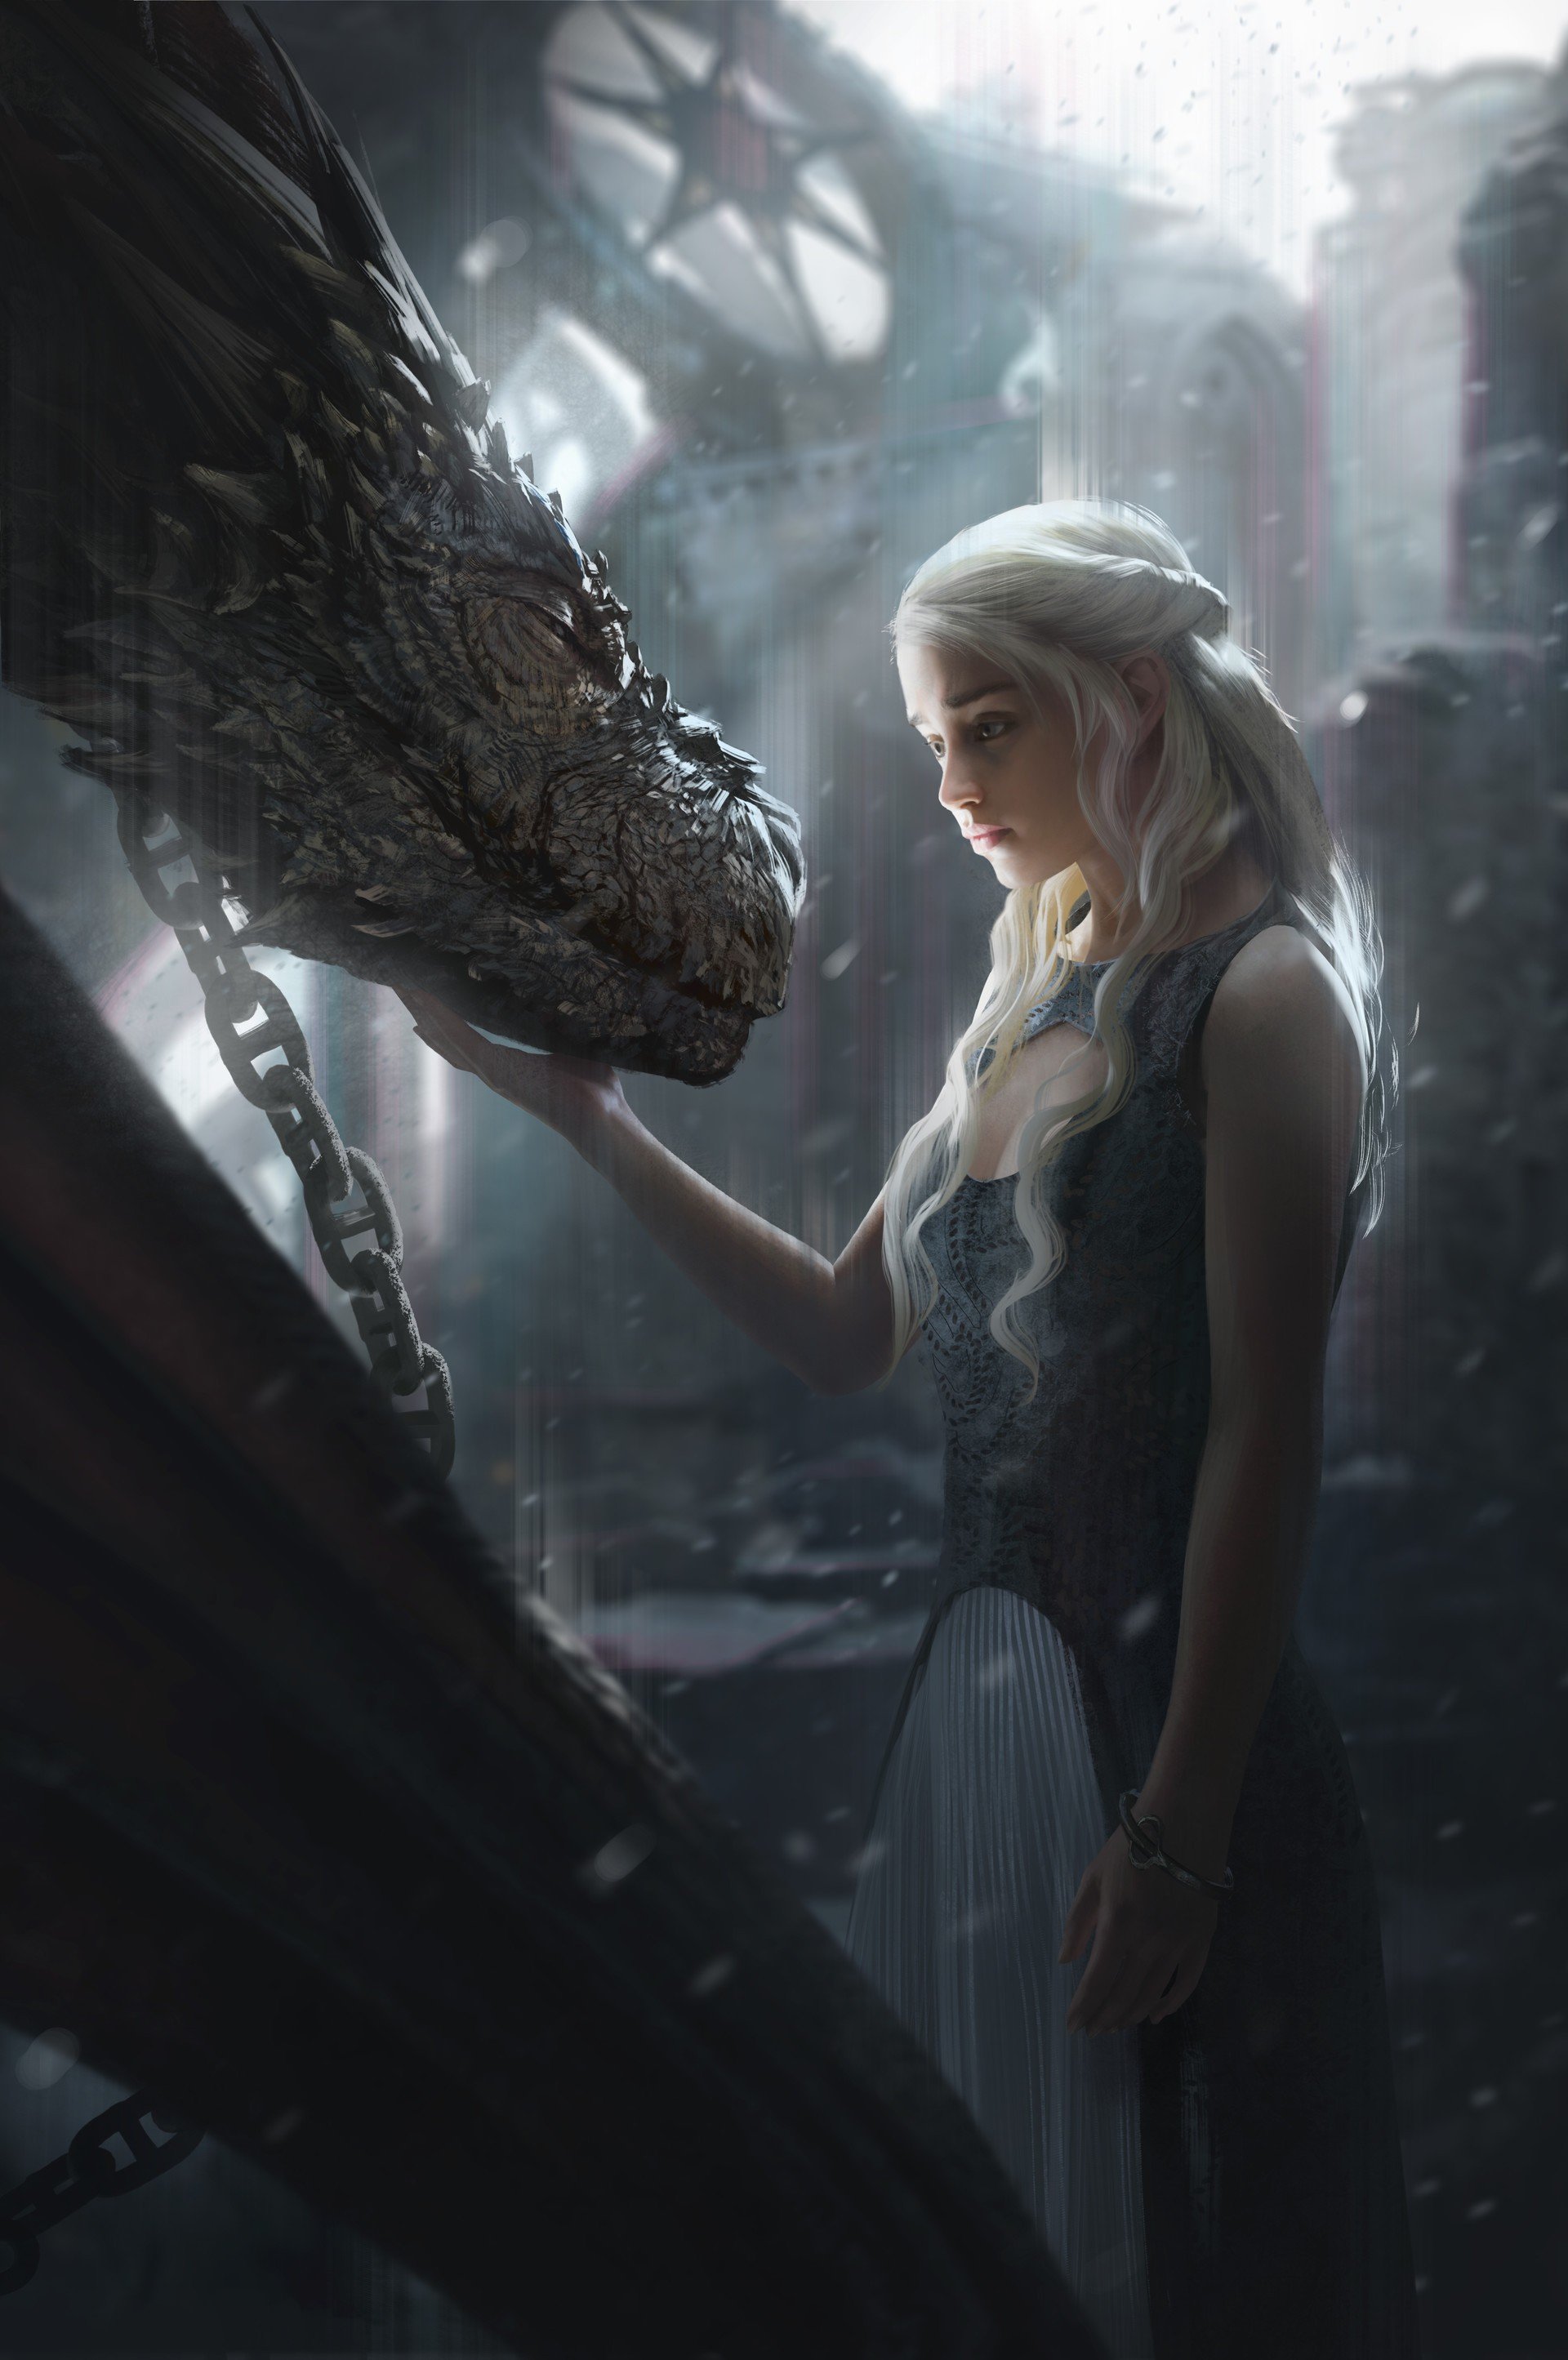 game of thrones hd mobile wallpapers,darkness,cg artwork,fictional character,photography,illustration